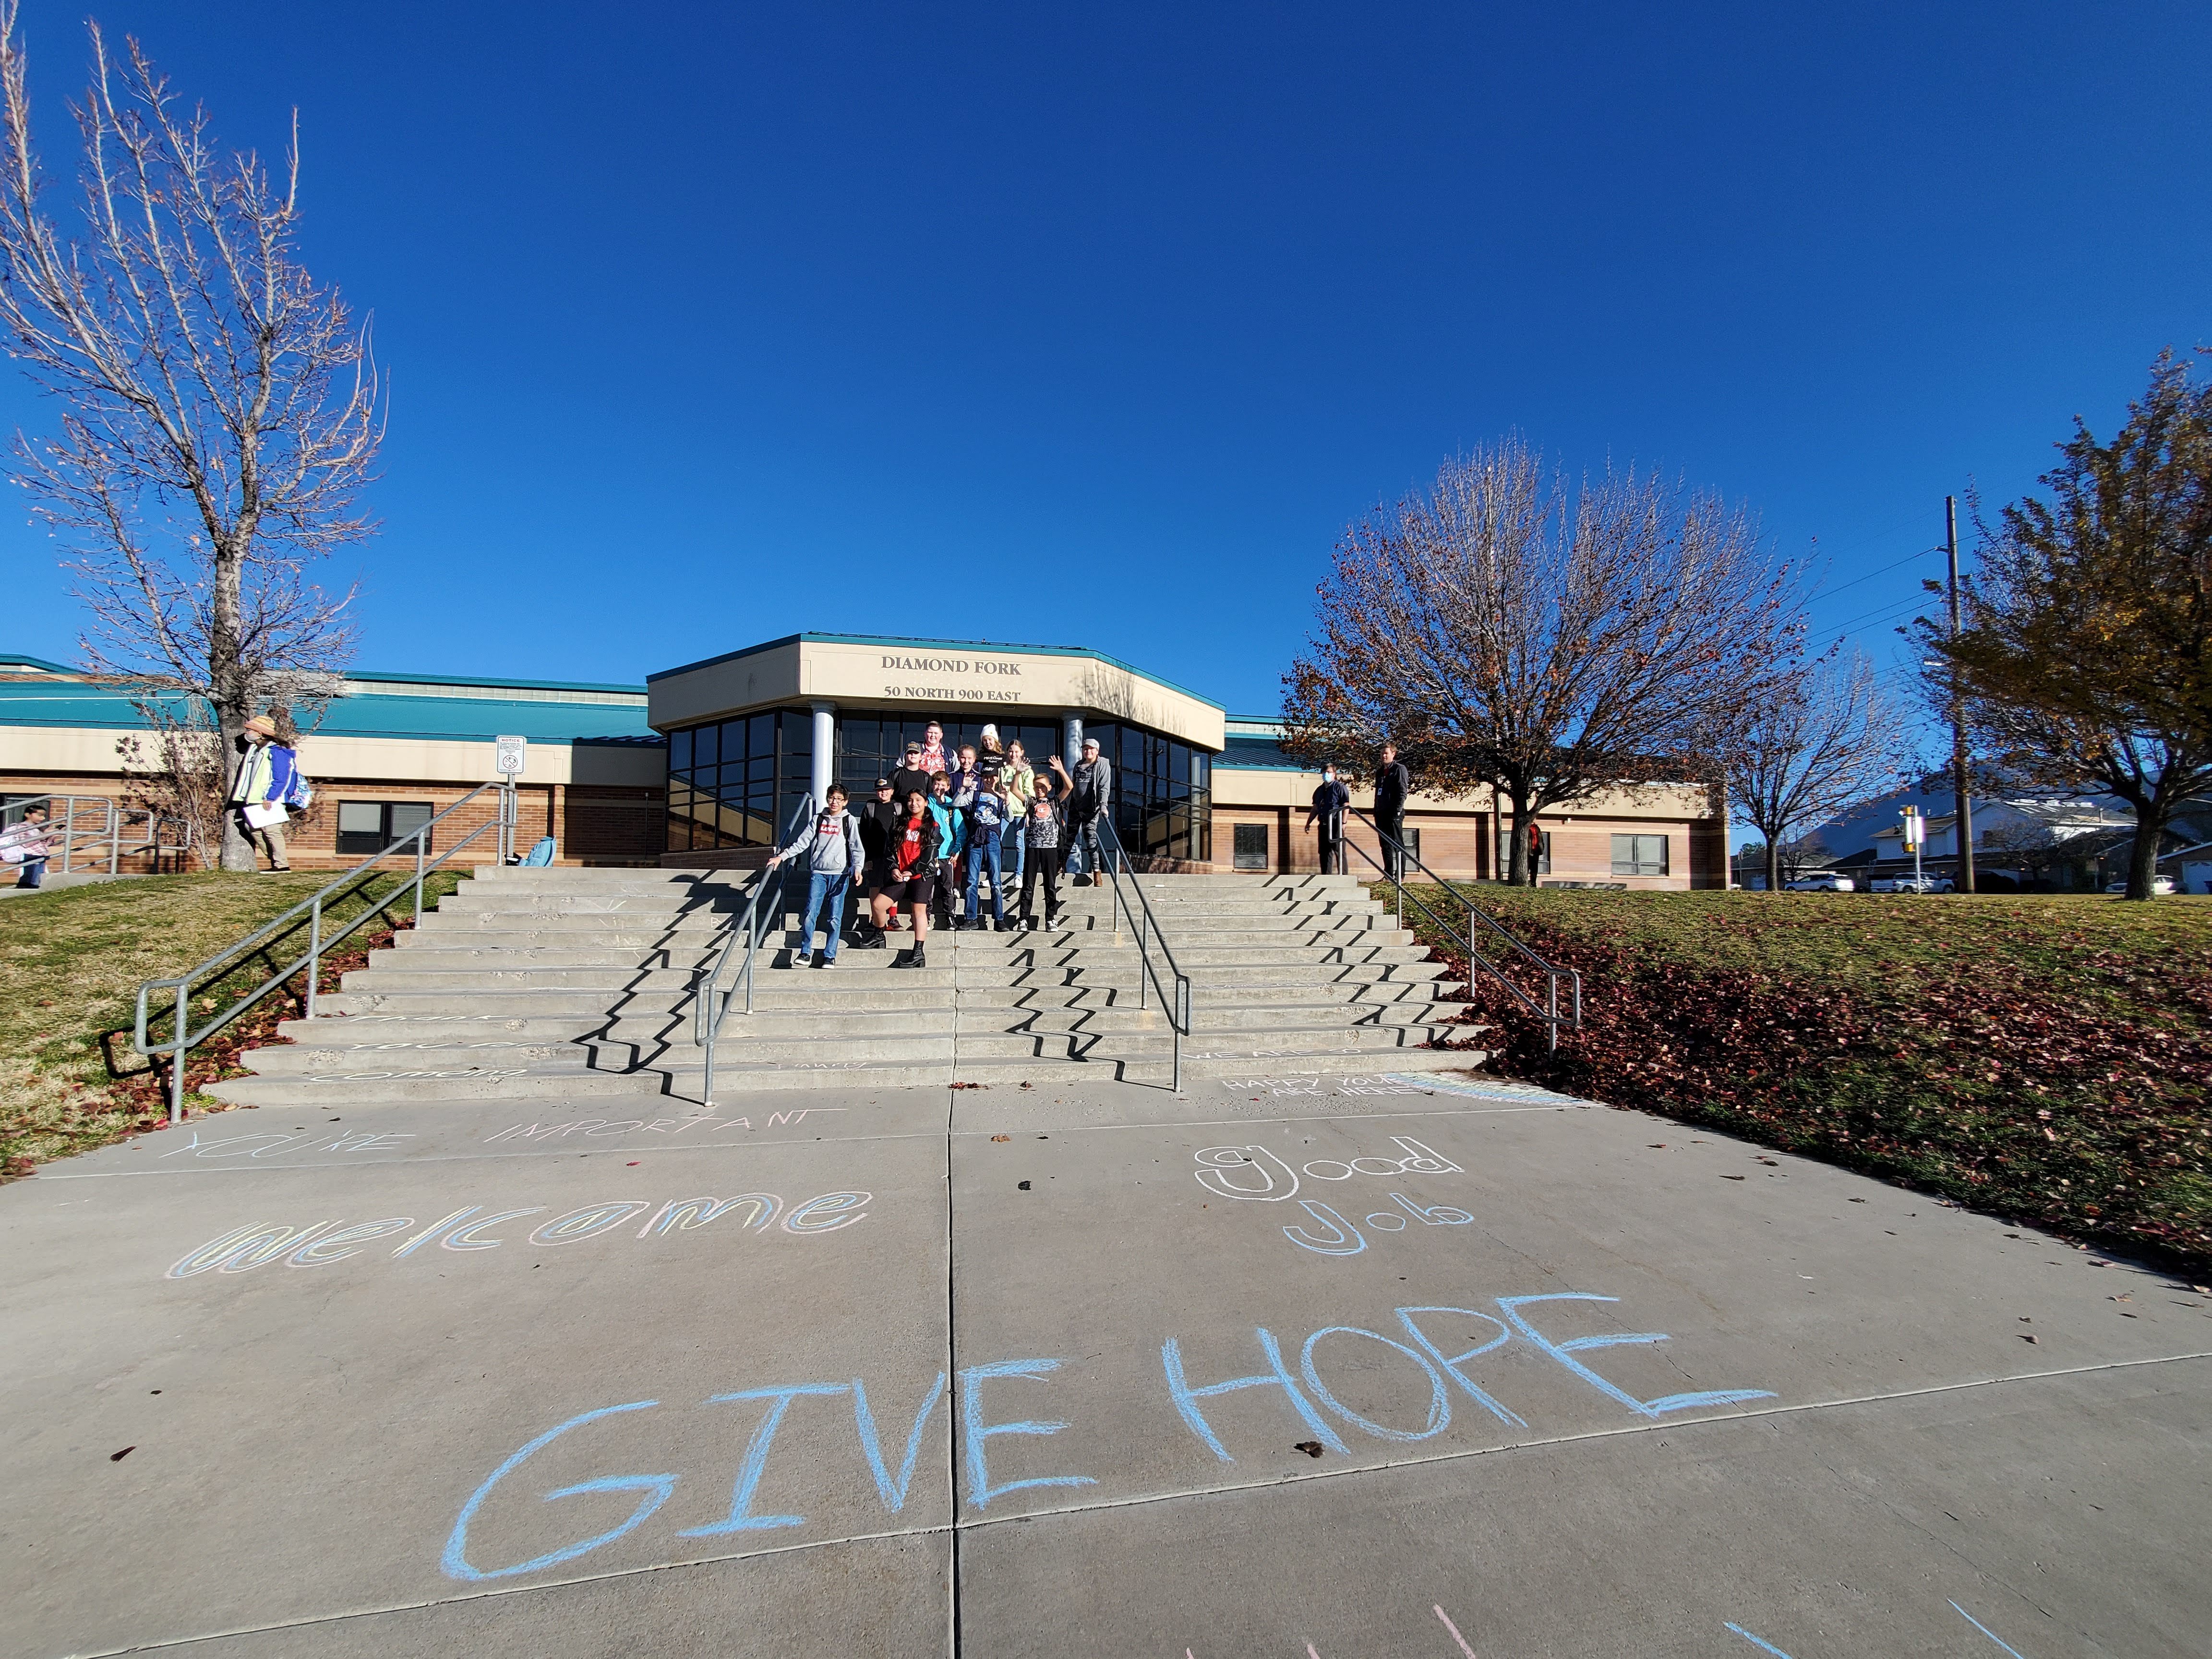 Students create chalk messages on the front steps at DFMS